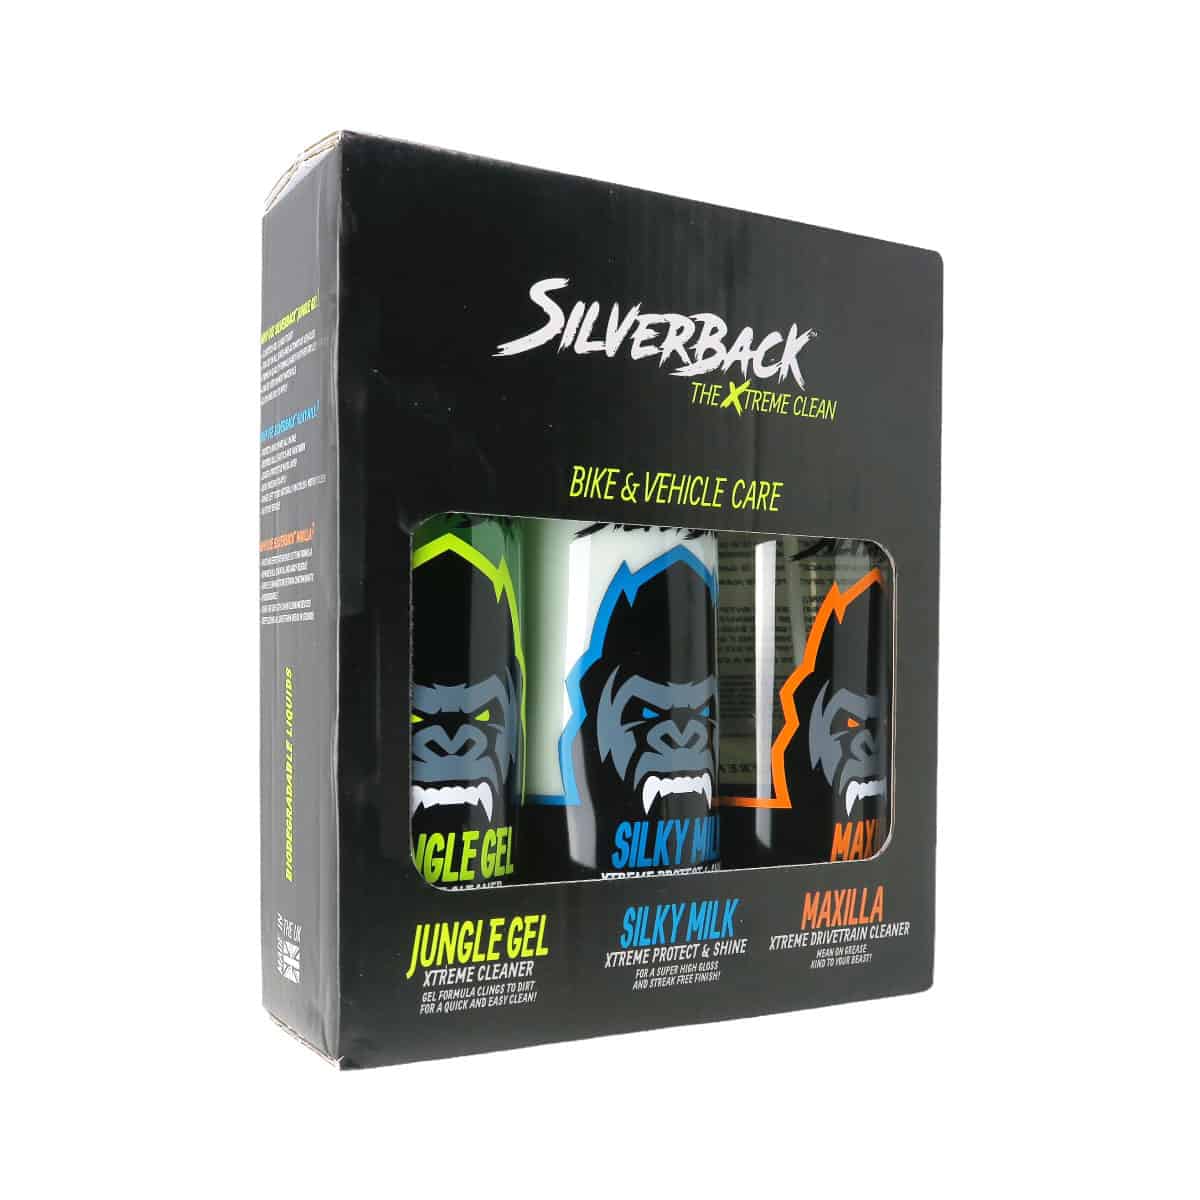 Silverback Motorcycle Cleaning Gift Box: The 3 essential treatments for your motorcycle & dirtbike box front